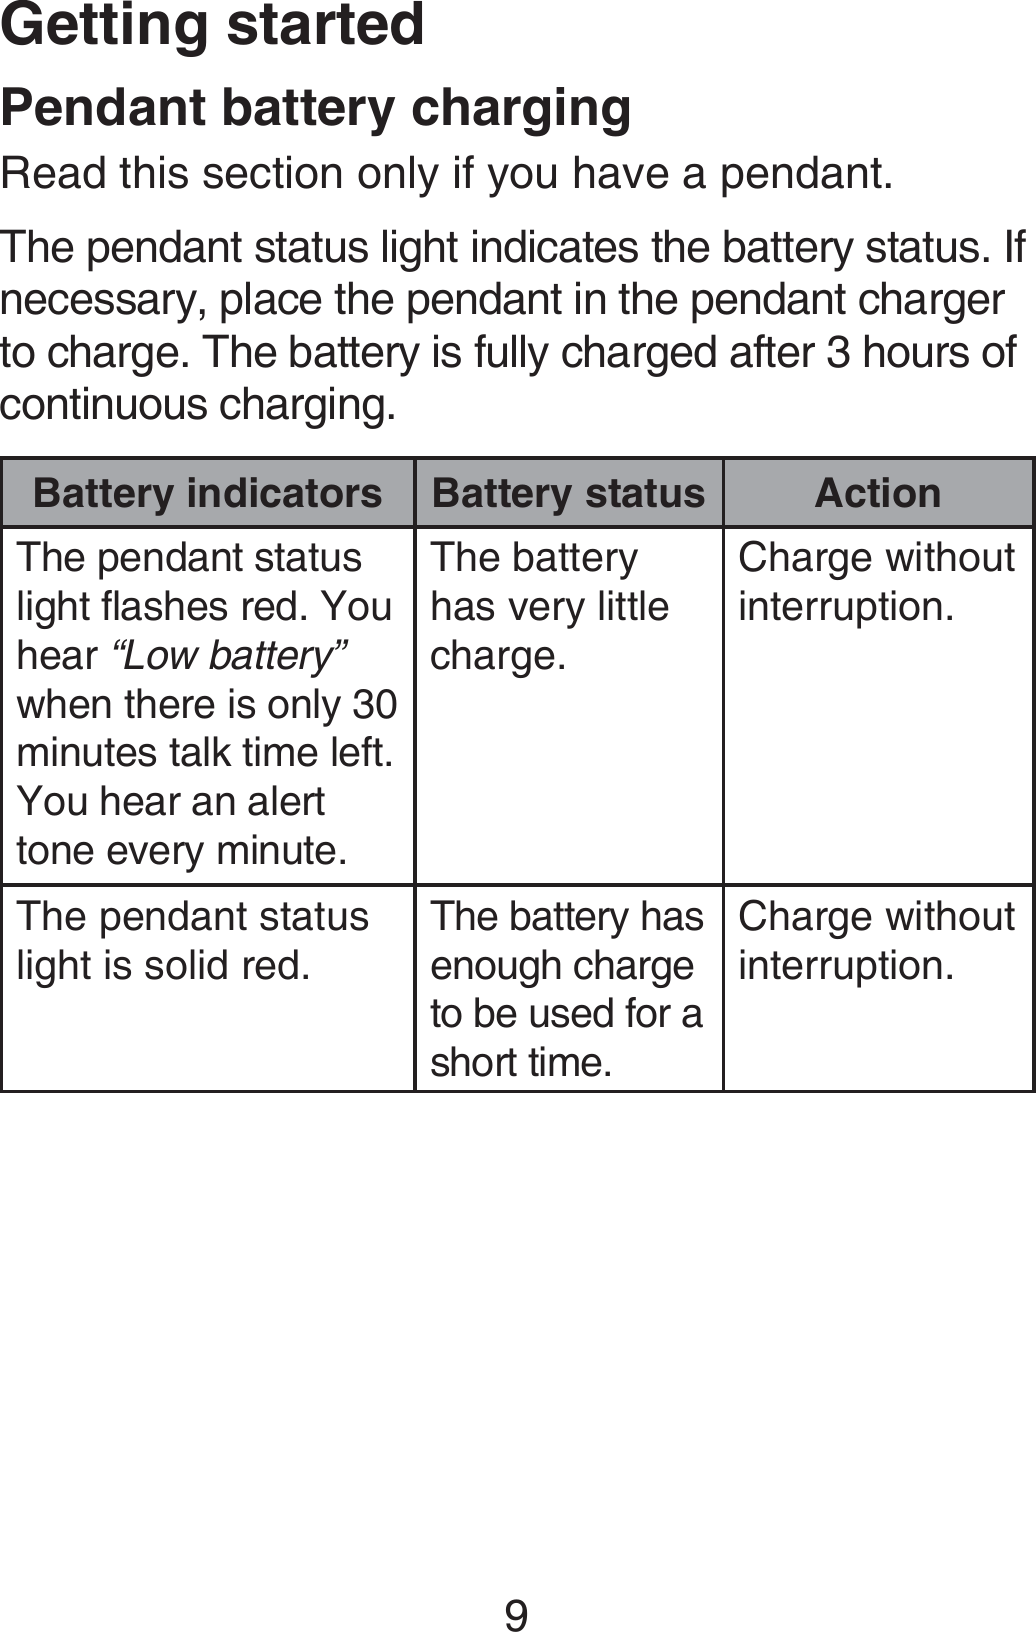 Getting started9Pendant battery chargingRead this section only if you have a pendant.The pendant status light indicates the battery status. If necessary, place the pendant in the pendant charger to charge. The battery is fully charged after 3 hours of continuous charging.Battery indicators Battery status ActionThe pendant status light flashes red. You hear “Low battery” when there is only 30 minutes talk time left. You hear an alert tone every minute.The battery has very little charge.Charge without interruption.The pendant status light is solid red.The battery has enough charge to be used for a short time.Charge without interruption.